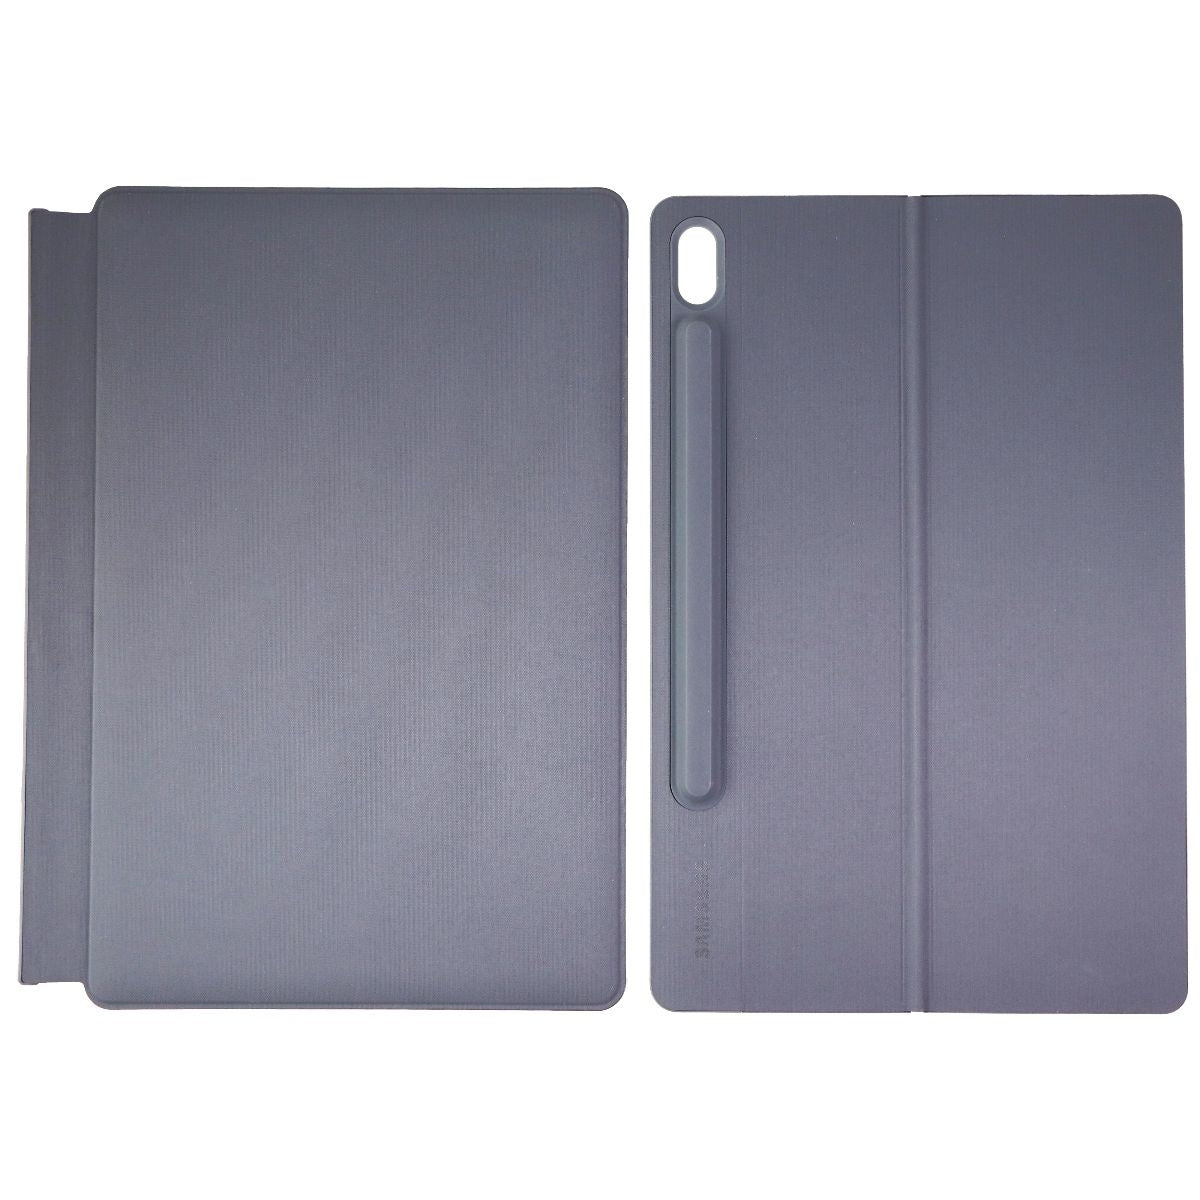 Samsung Book Cover Keyboard for Samsung Galaxy Tab S6 - Gray (EF-DT860UJEGUJ) iPad/Tablet Accessories - Cases, Covers, Keyboard Folios Samsung    - Simple Cell Bulk Wholesale Pricing - USA Seller